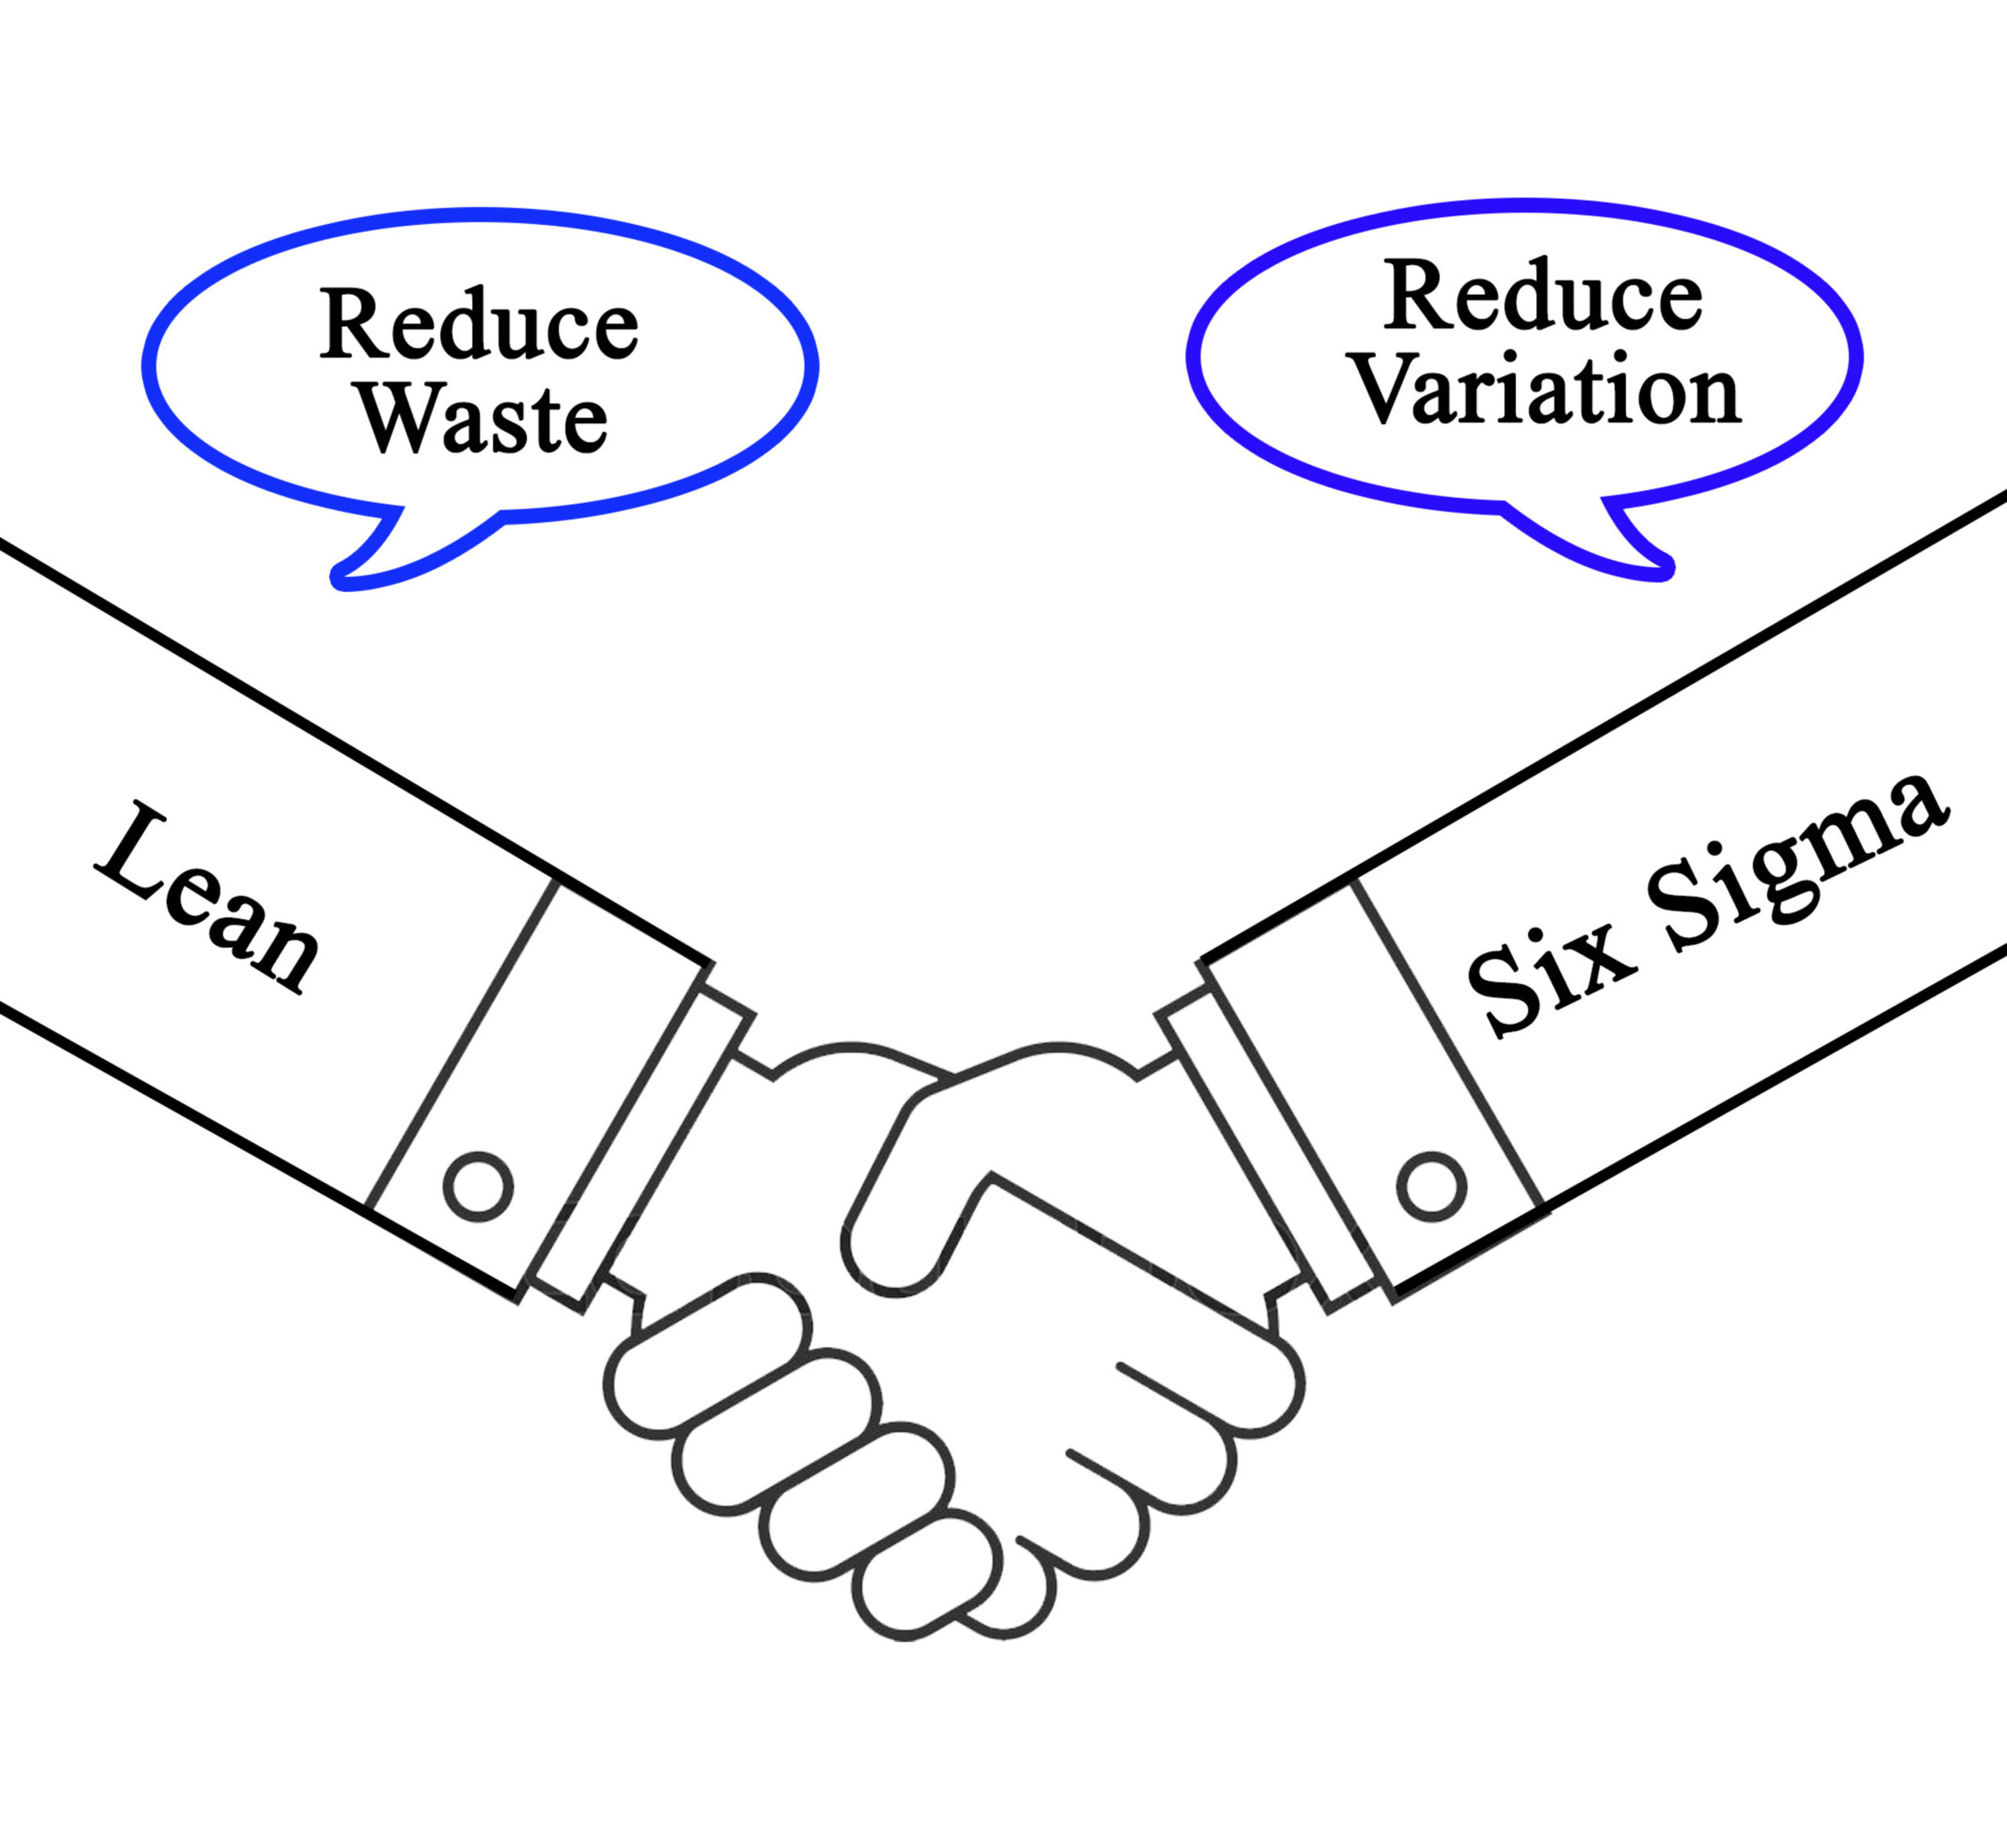 Lean Versus Six Sigma: What Is The Difference?